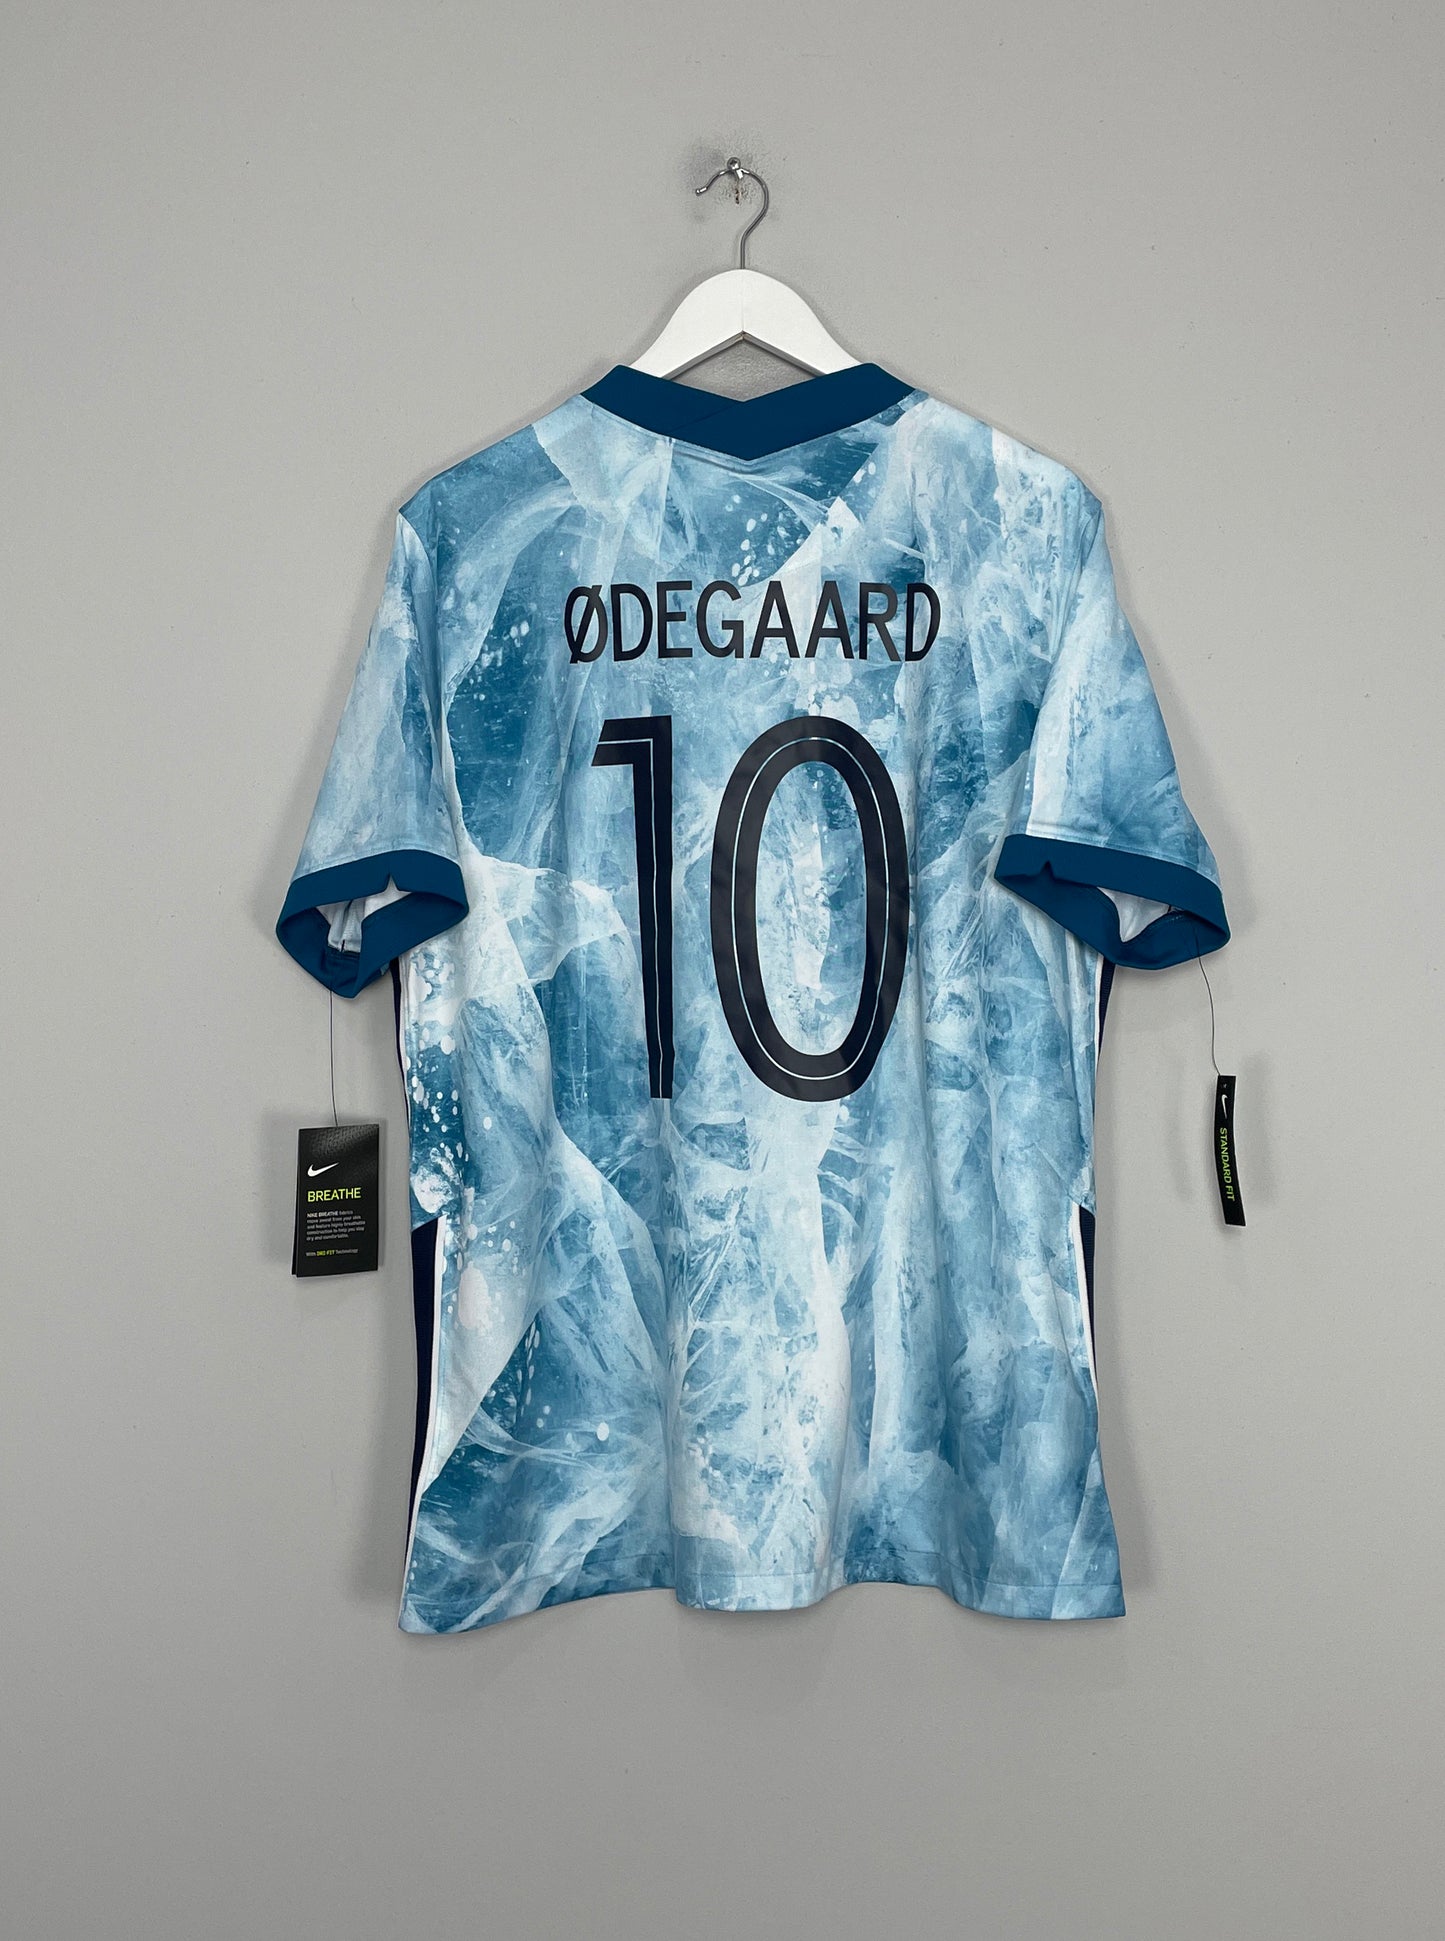 Image of the Norway Odegaard shirt from the 2020/21 season